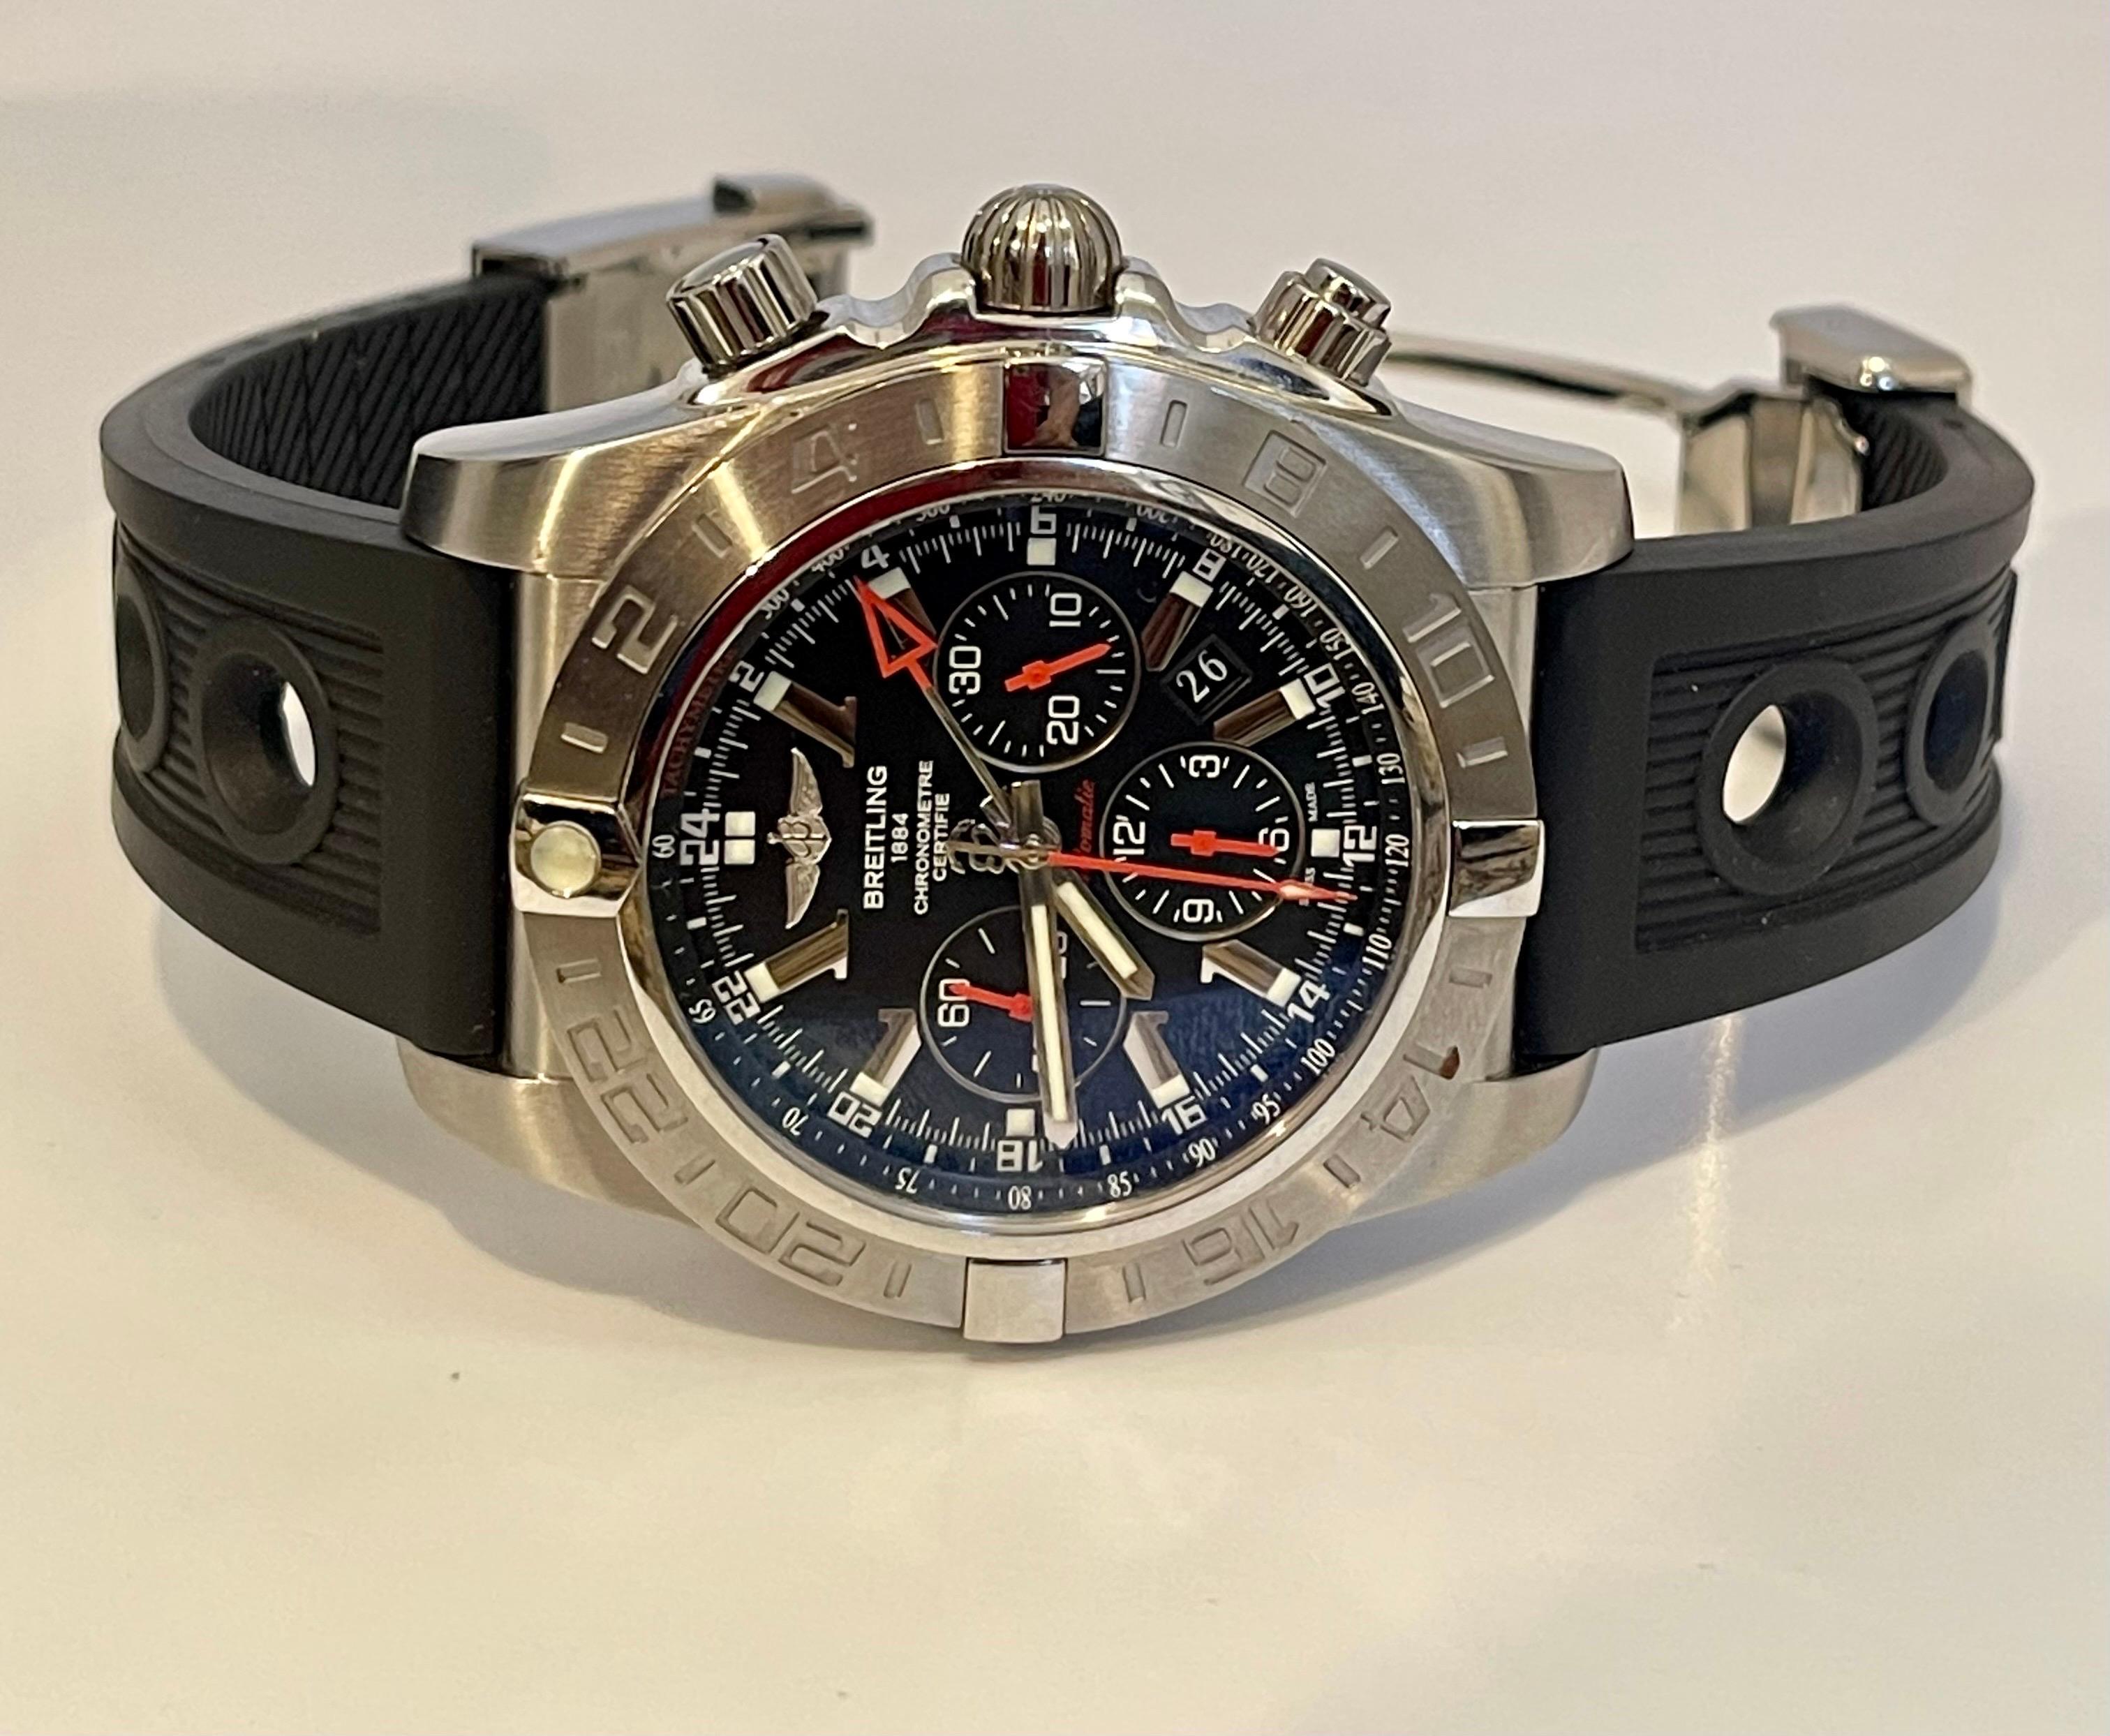 Breitling Super Avenger Chrono Limited Edition Black PVD Steel Rare, 4004422 For Sale 4